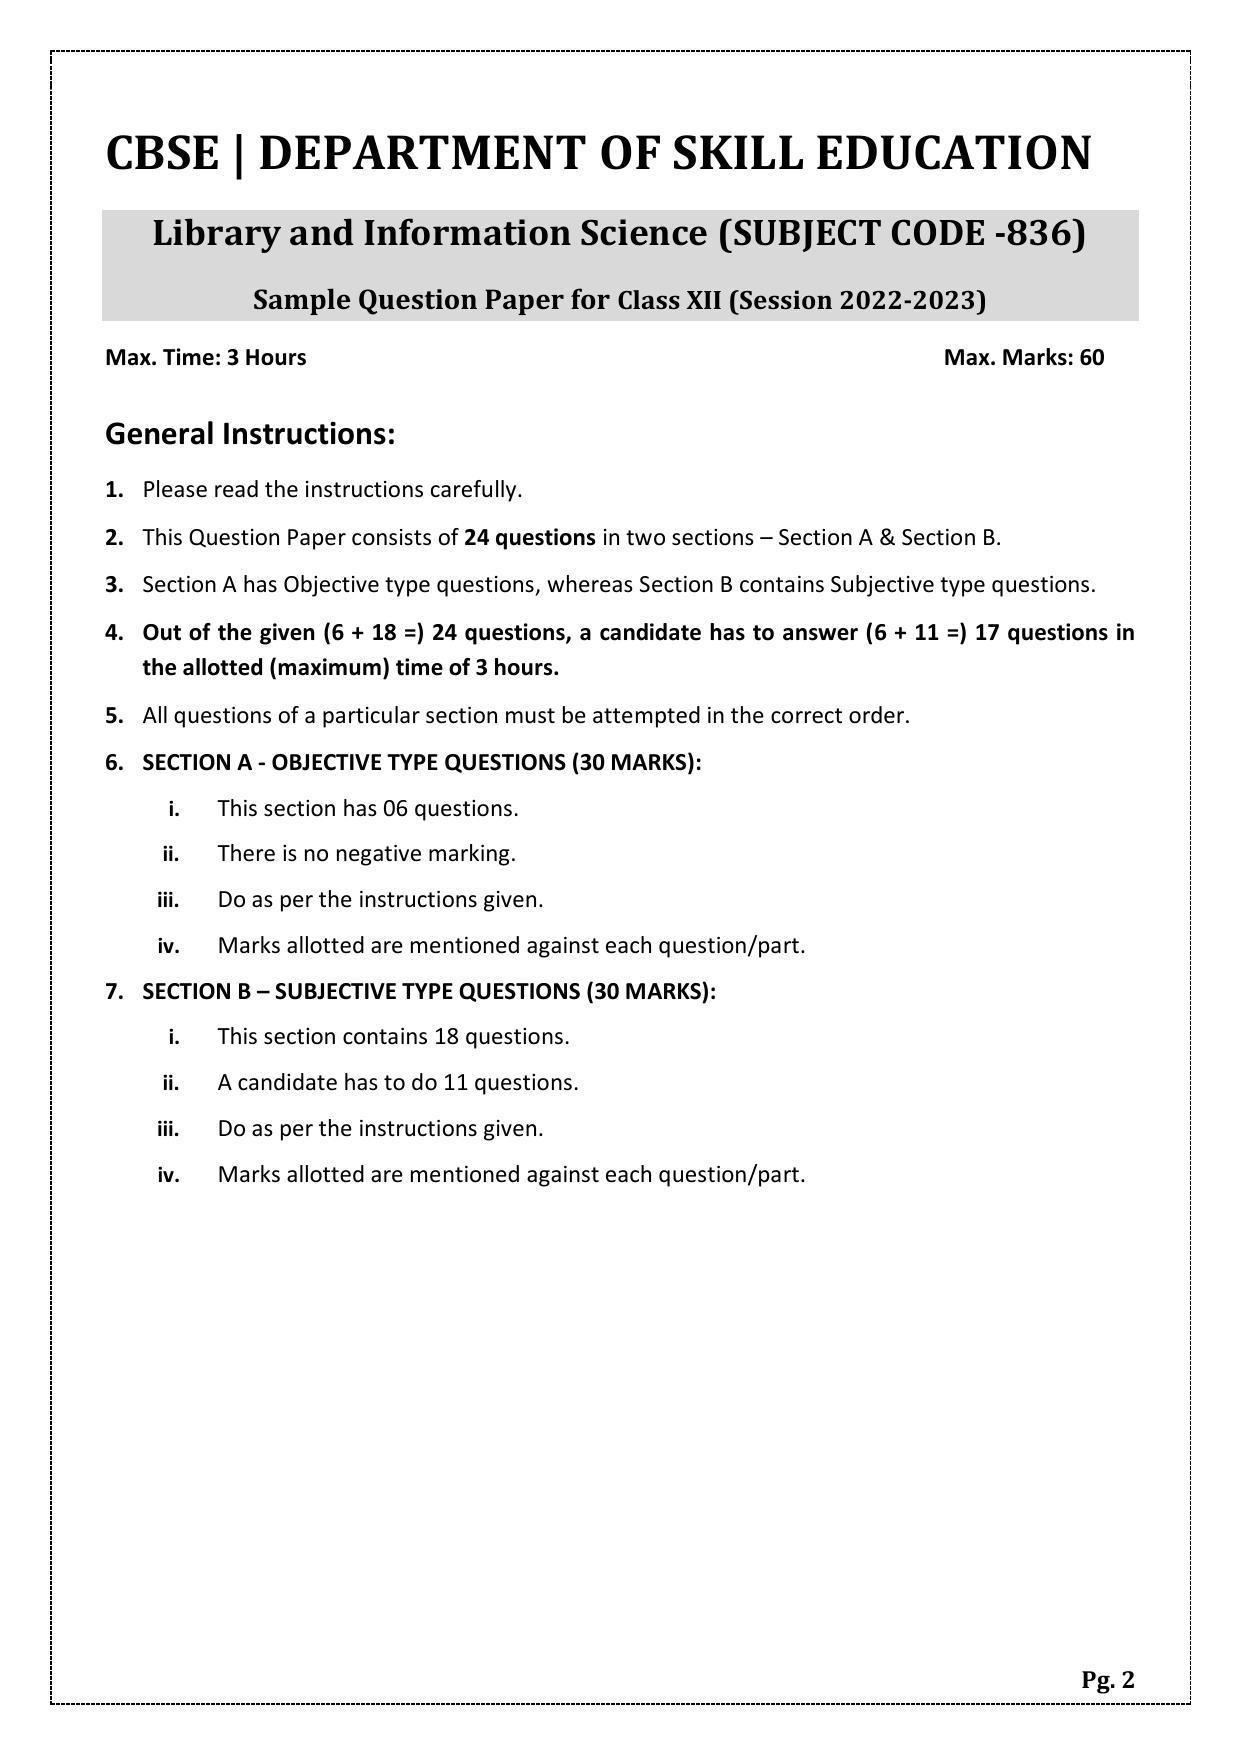 CBSE Class 12 Library & Information Science (Skill Education) Sample Papers 2023 - Page 2